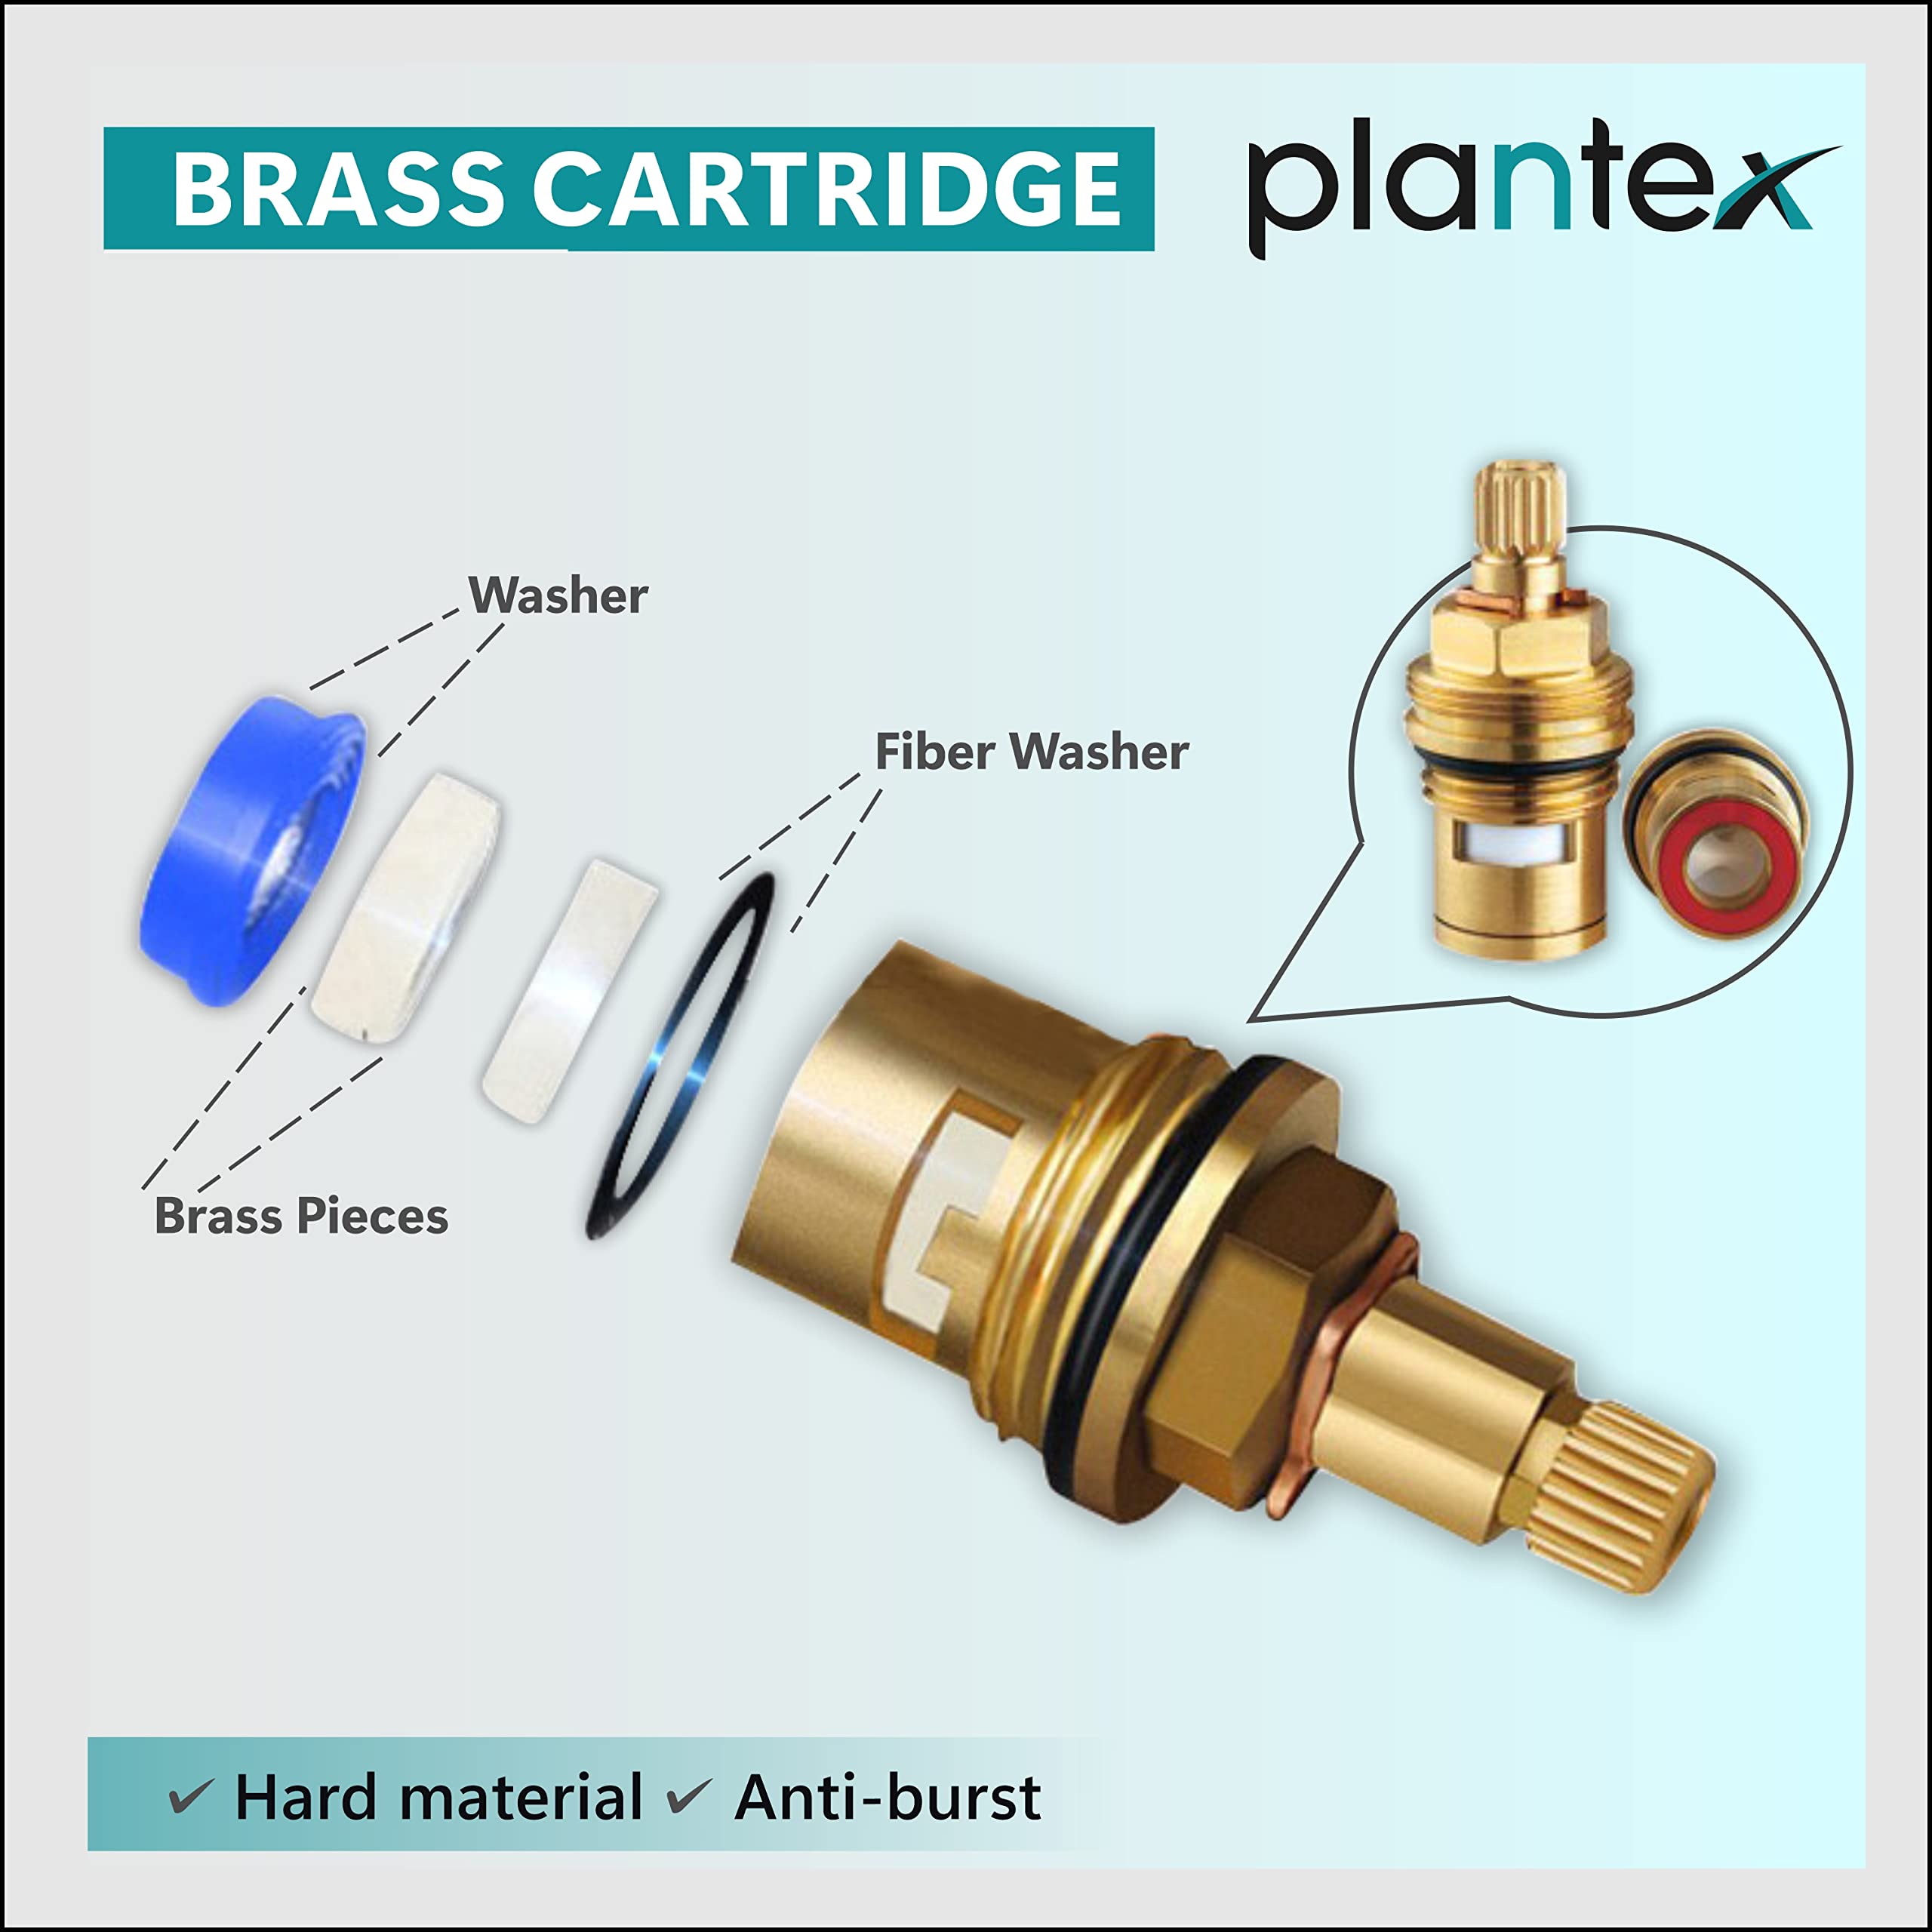 Plantex Pure Brass PAC-1802 Single Lever Bib Cock (Long Body) for Bathroom & Kitchen Sink Tap/Basin Faucet Tap with Brass Wall Flange & Teflon Tape. (Mirror-Chrome Finish)